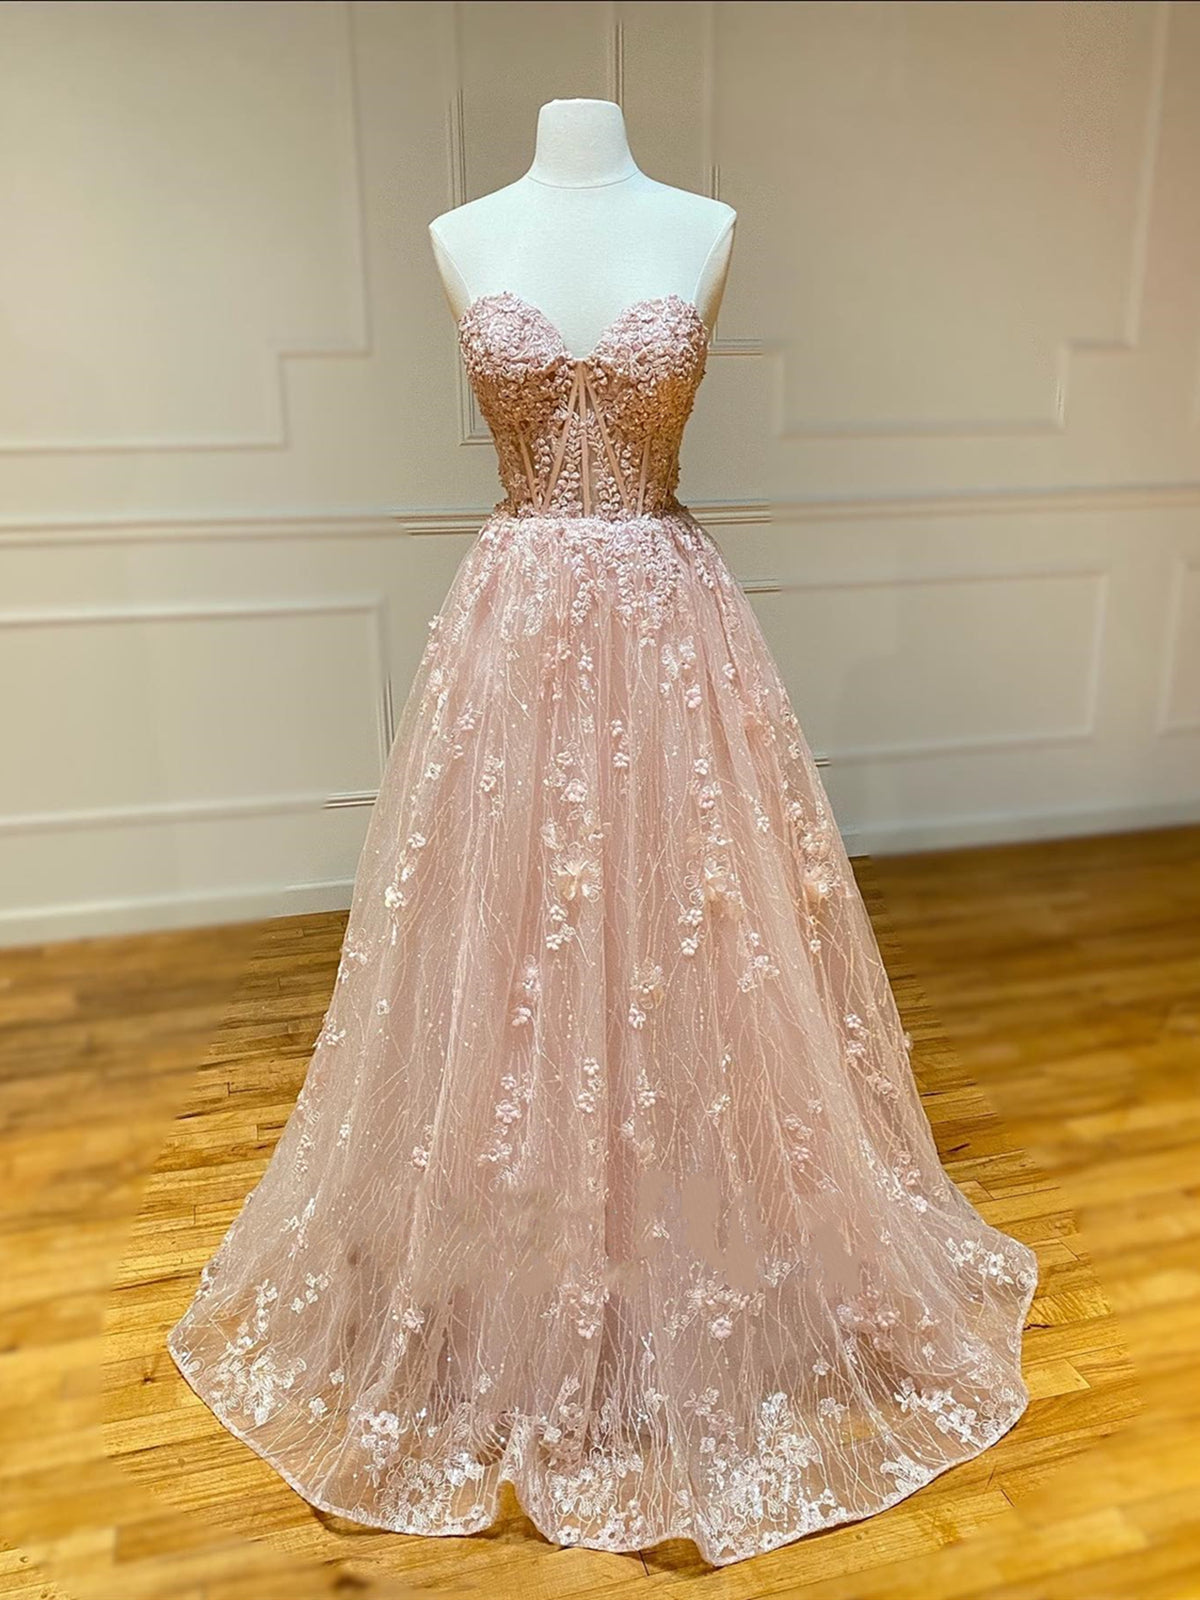 Sweetheart Neck Champagne Lace Prom Dresses, Champagne Lace Formal Evening Dresses